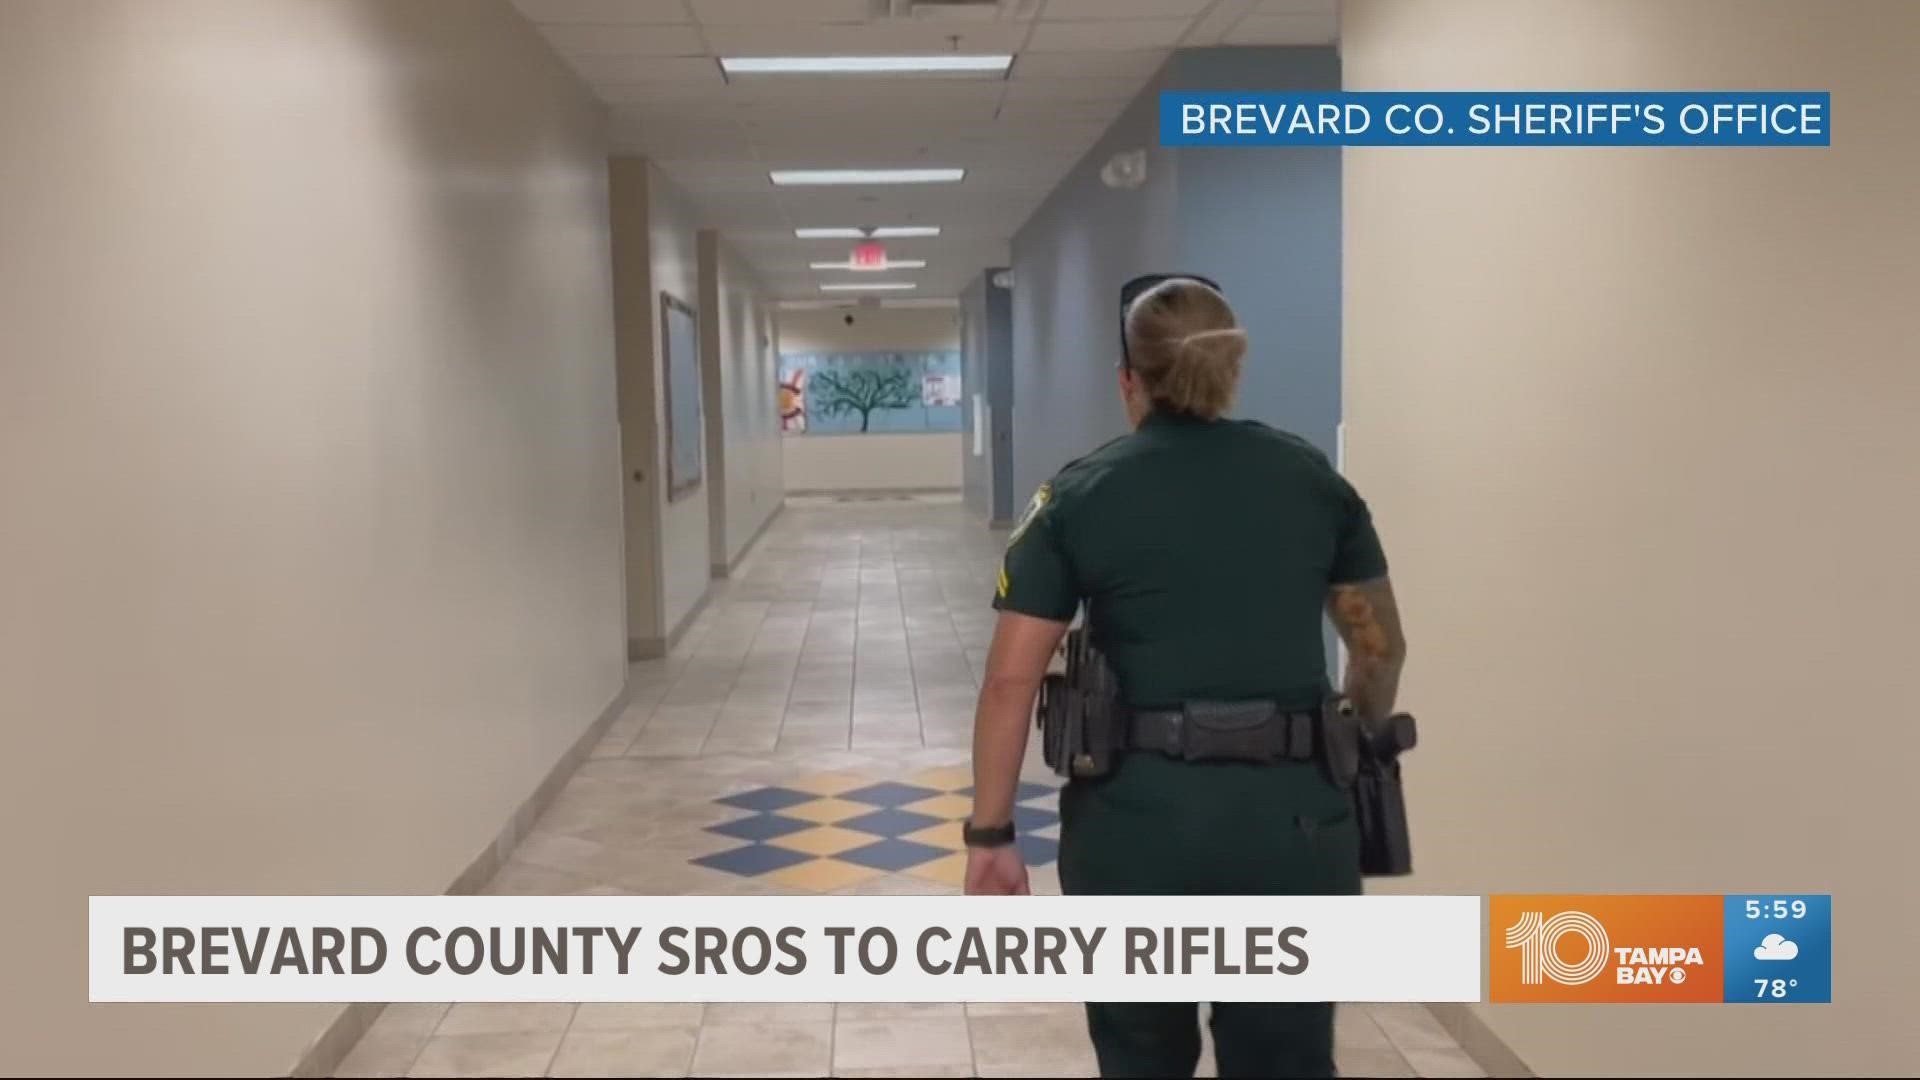 Brevard County Sheriff Wayne Ivey says the recent installment will alert those with an "evil heart" that they are not welcomed onto school campuses.